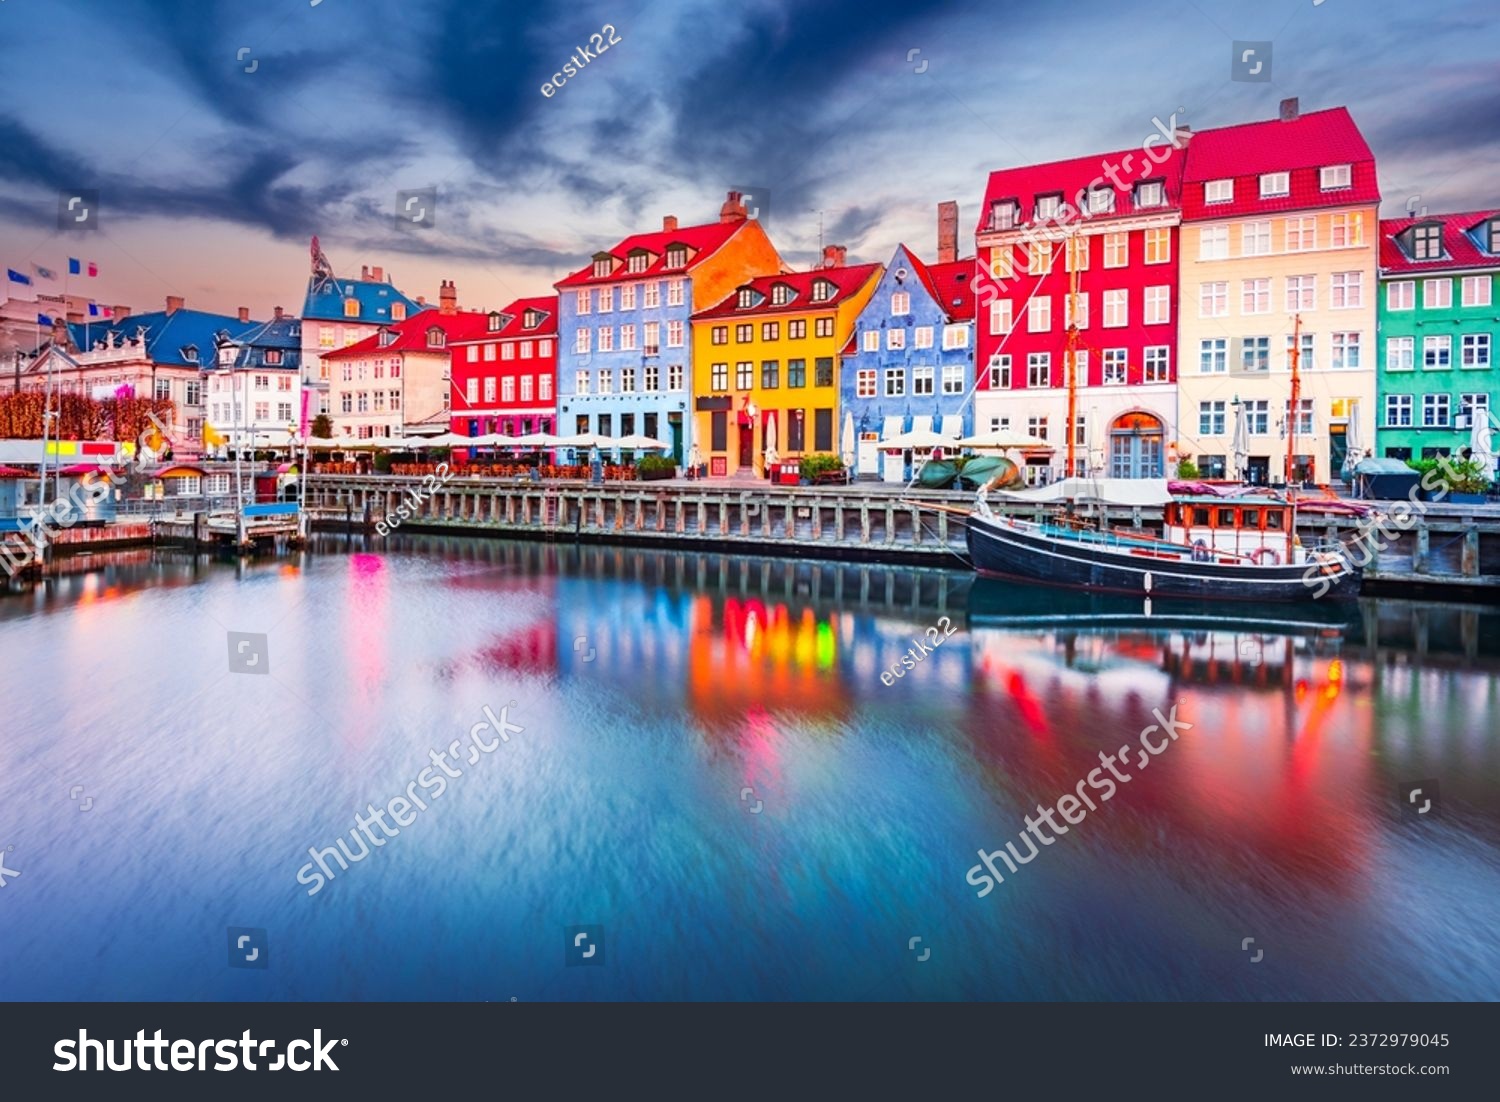 Charm of Copenhagen, Denmark at Nyhavn. Iconic canal, colorful night image and breathtaking water reflections. #2372979045